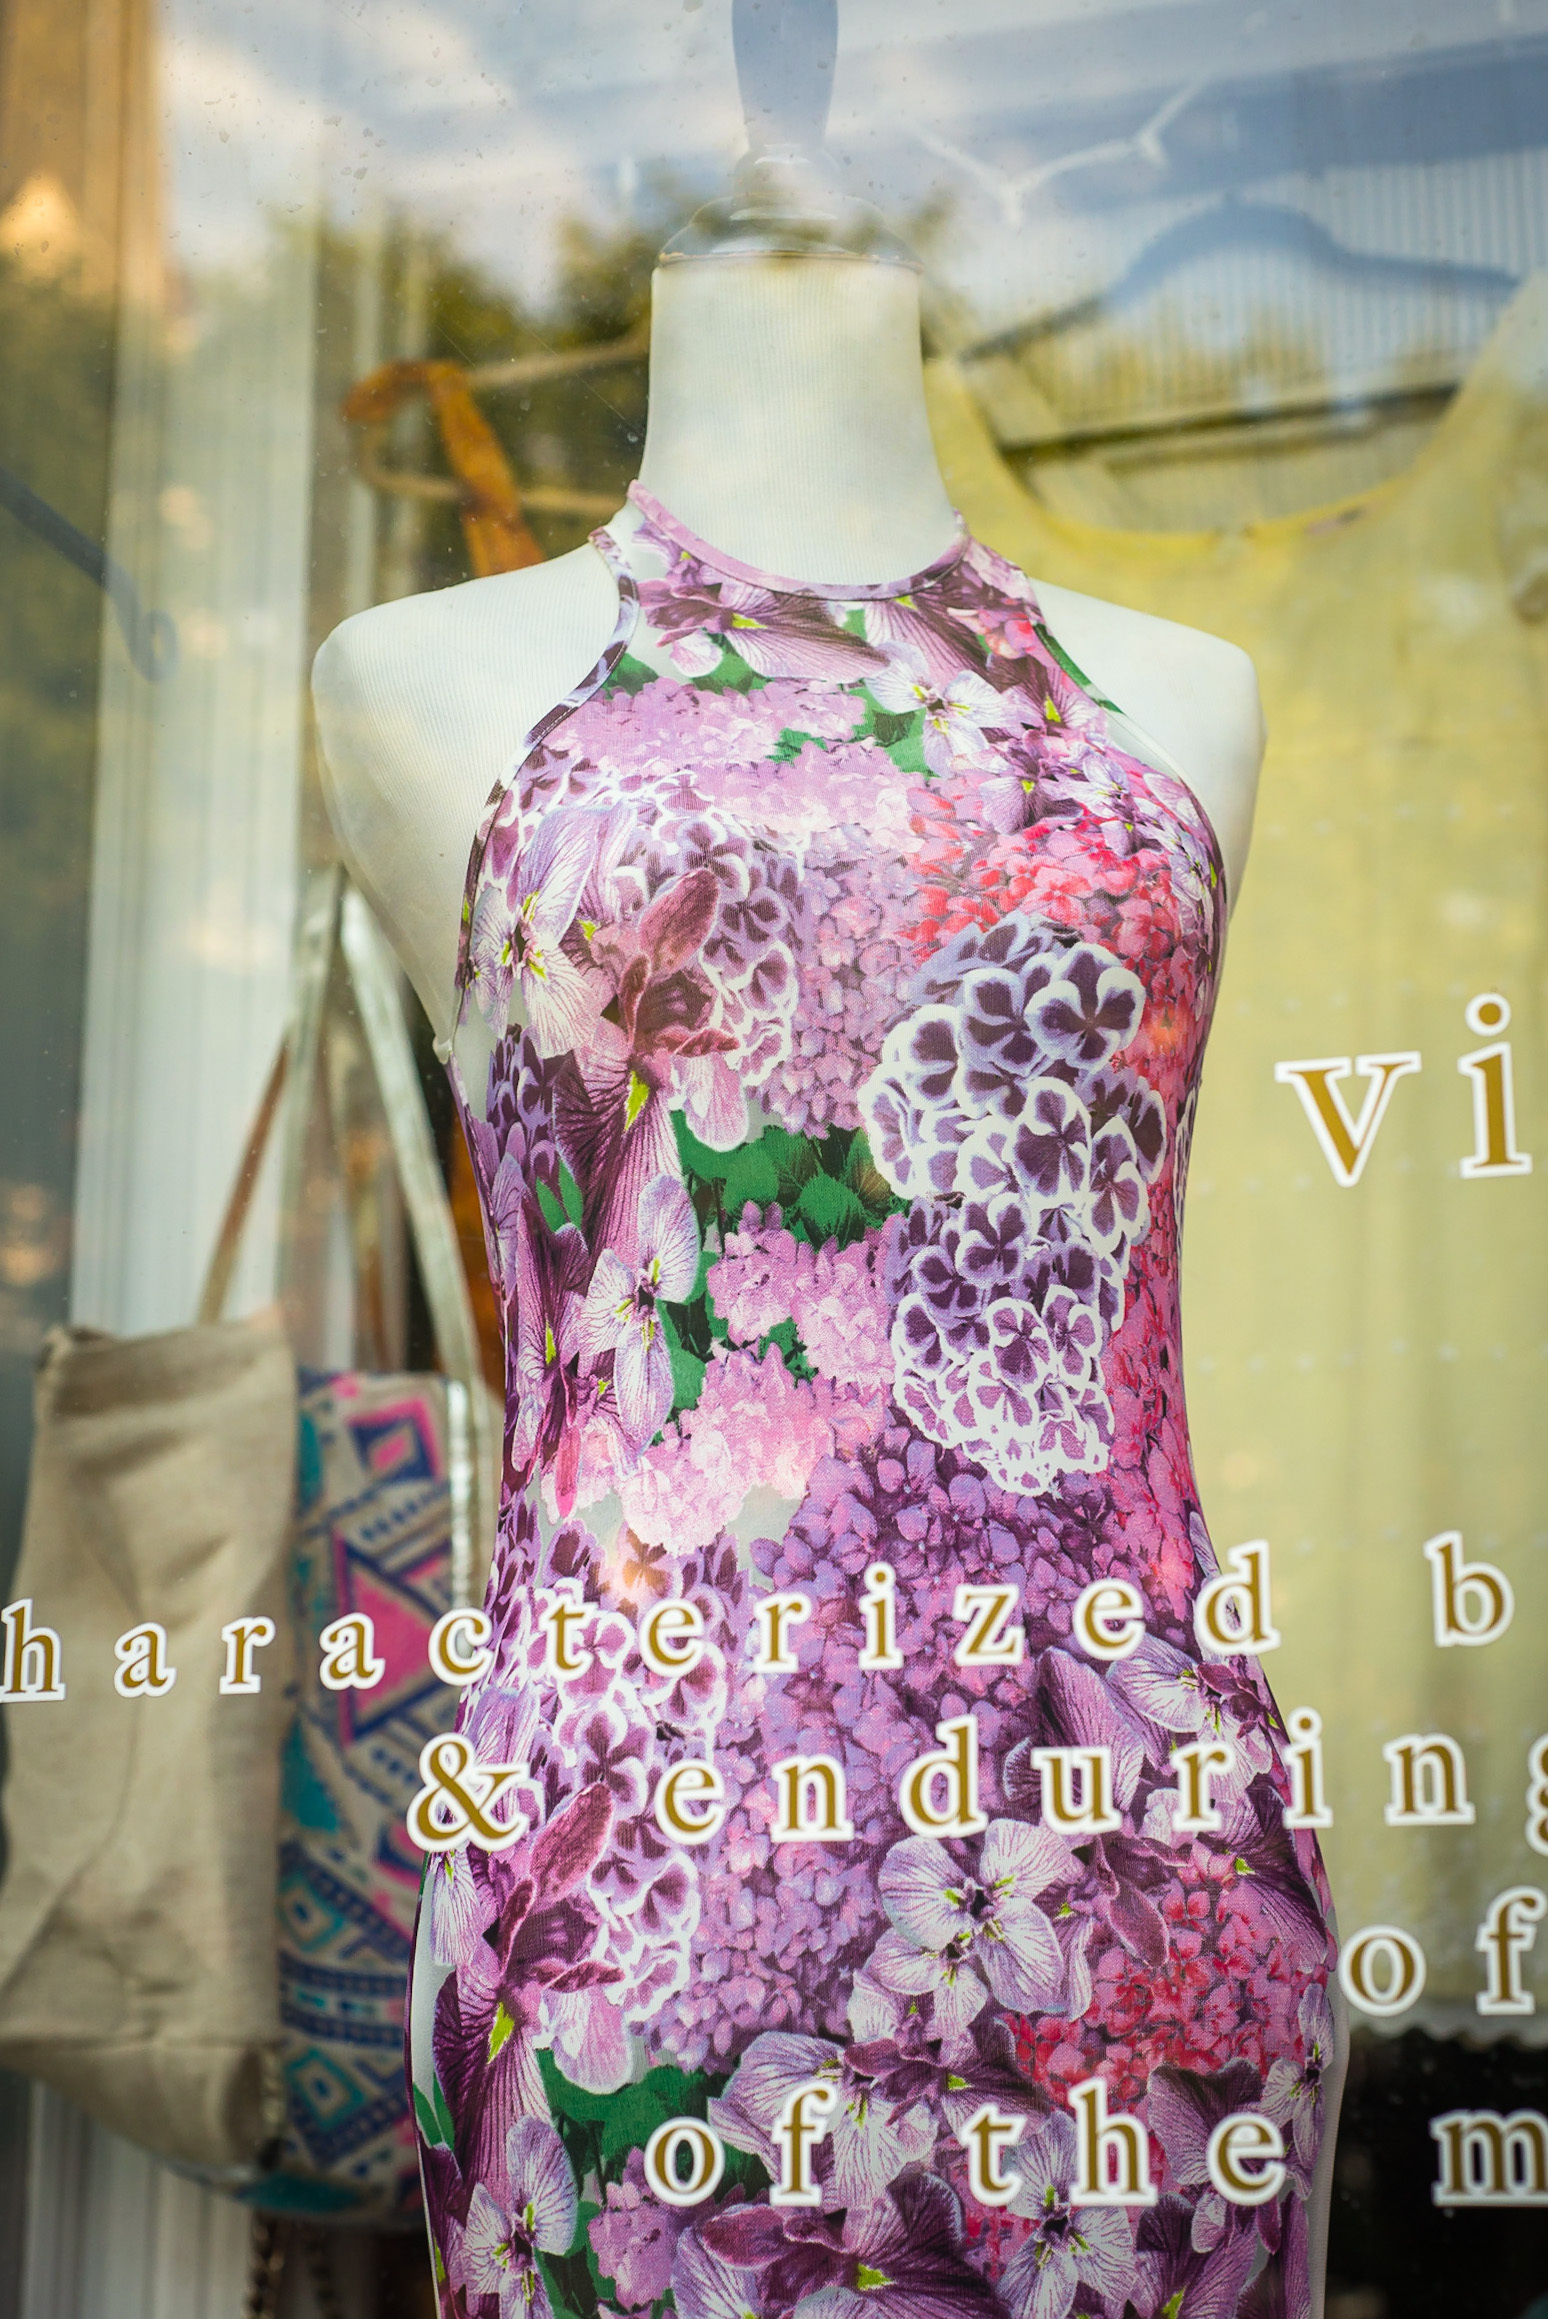 Mannequin in a pink floral dress in a shop window. Lettering naming the shop and describing it’s contents runs across the bottom.